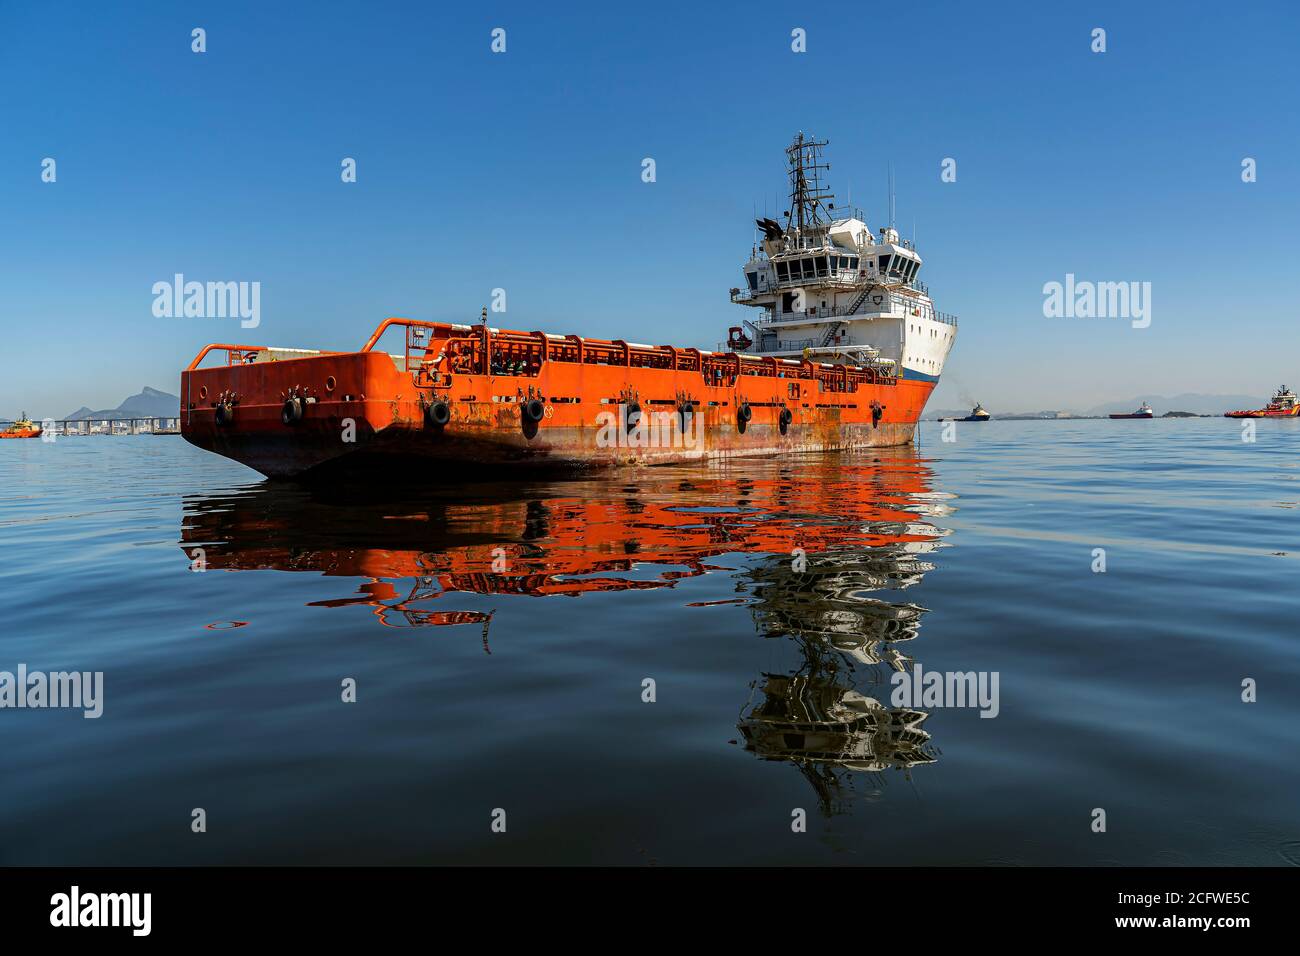 Moored ship. Red boat moored in the calm sea of a bay. Stock Photo